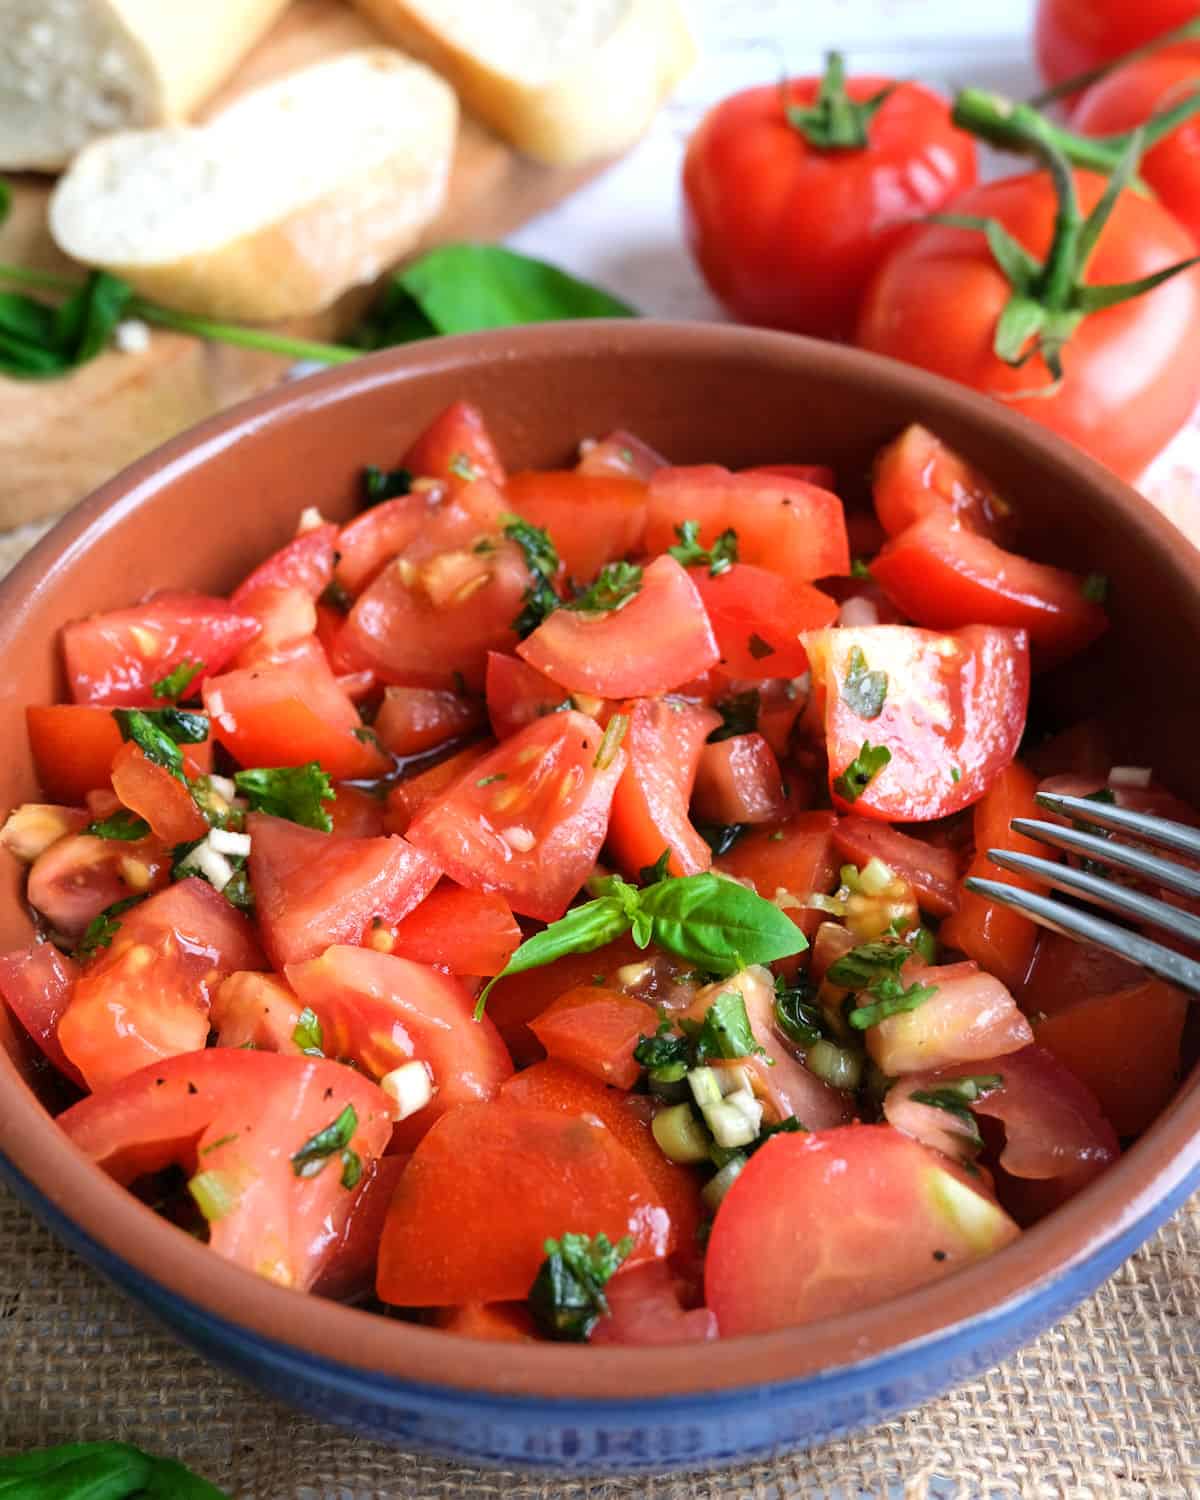 German Tomato Salad with bread and tomatoes in the background.